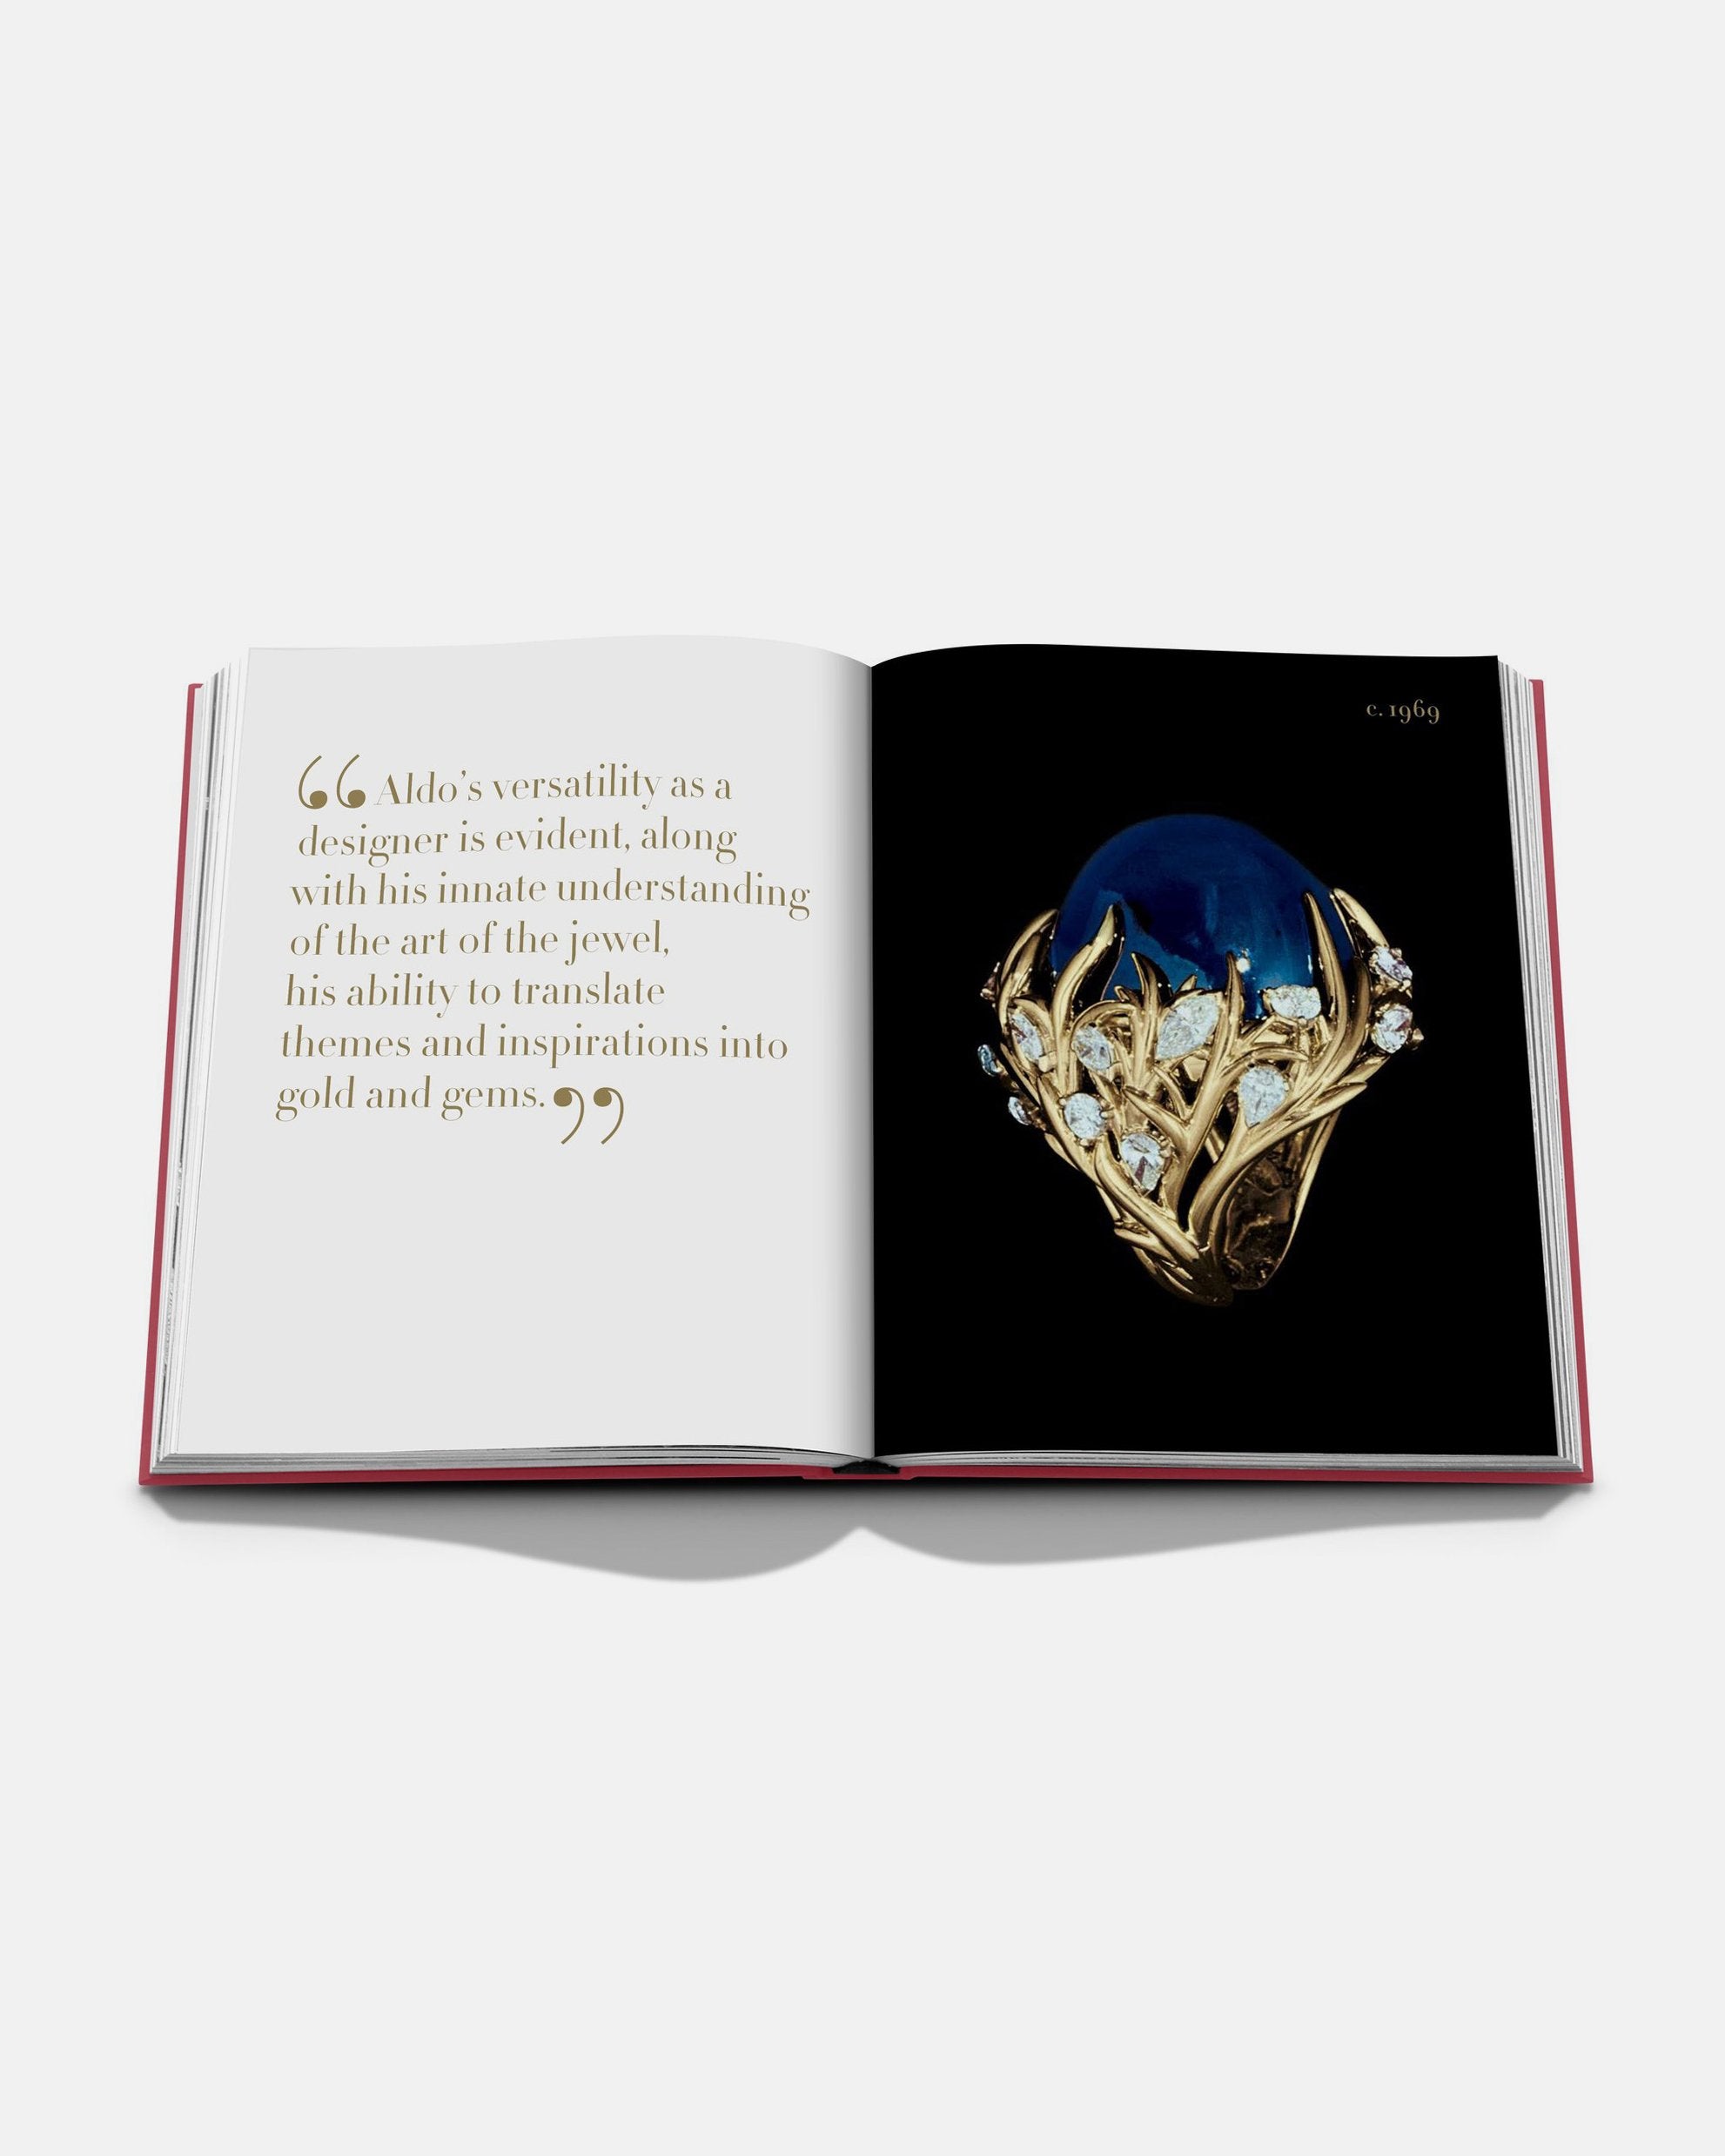 ASSOULINE - CIPULLO: The Man Who Made Jewelry Modern